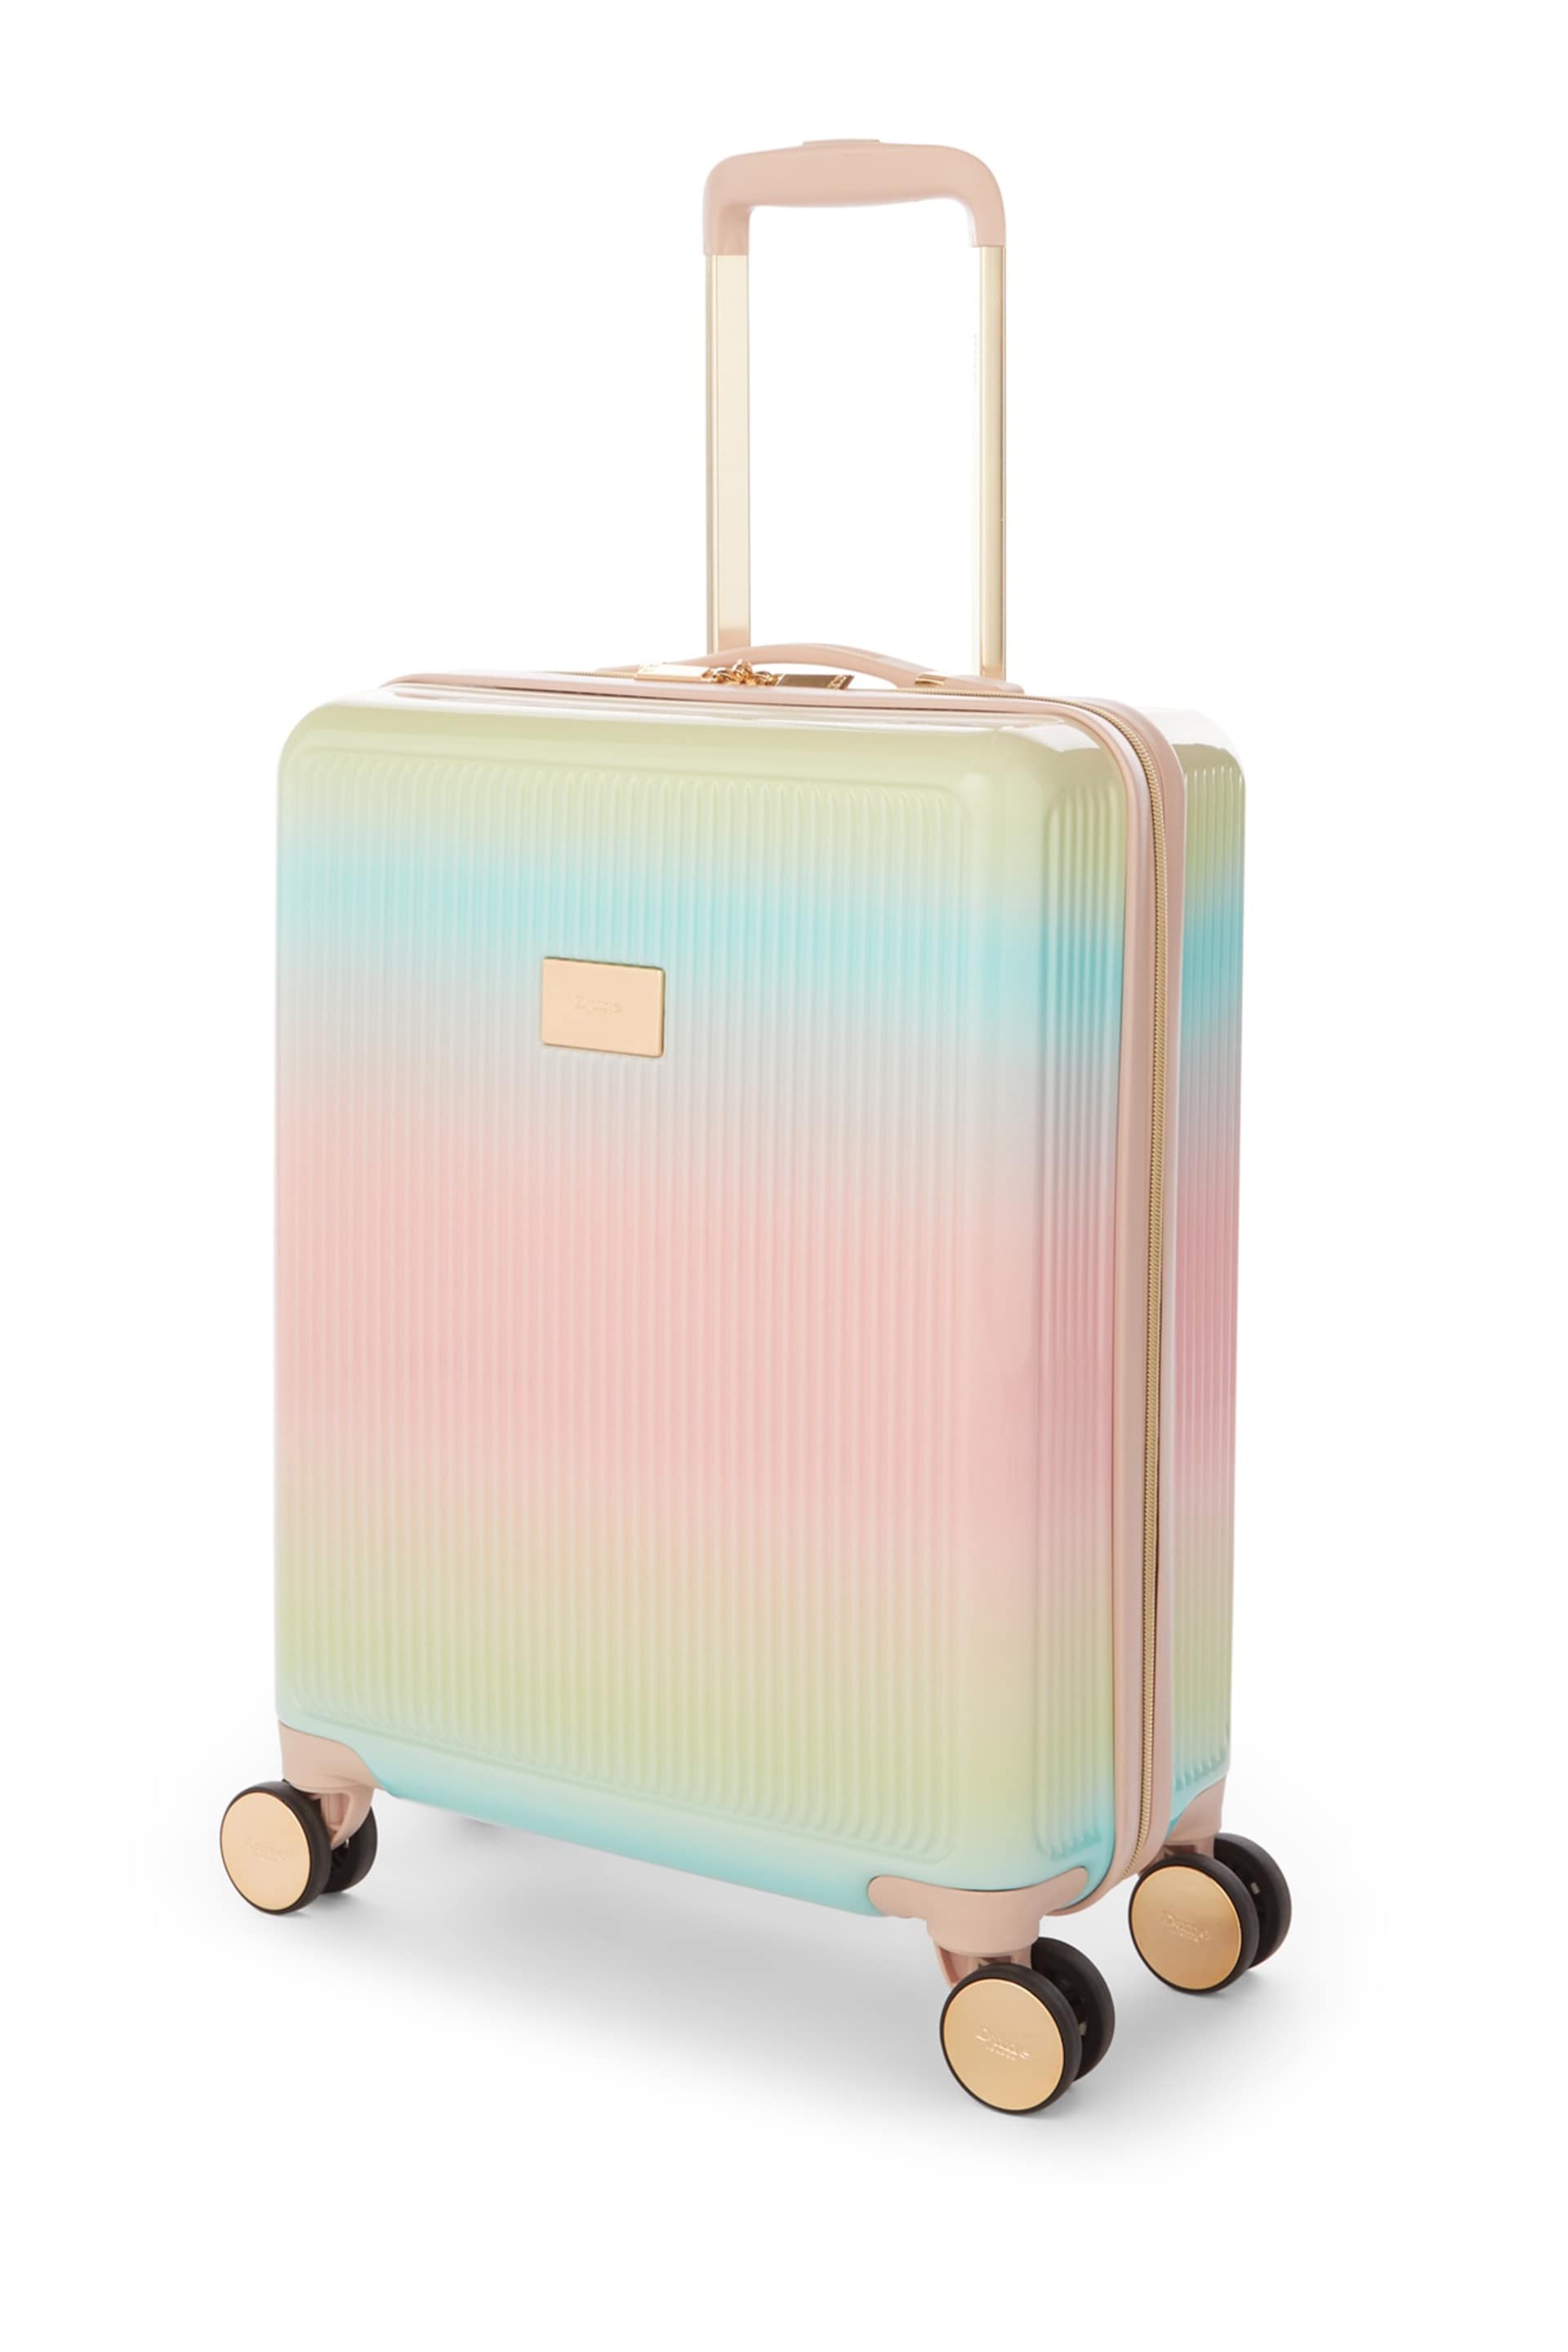 Dune London Pink Olive Cabin Suitcase - Image 1 of 6